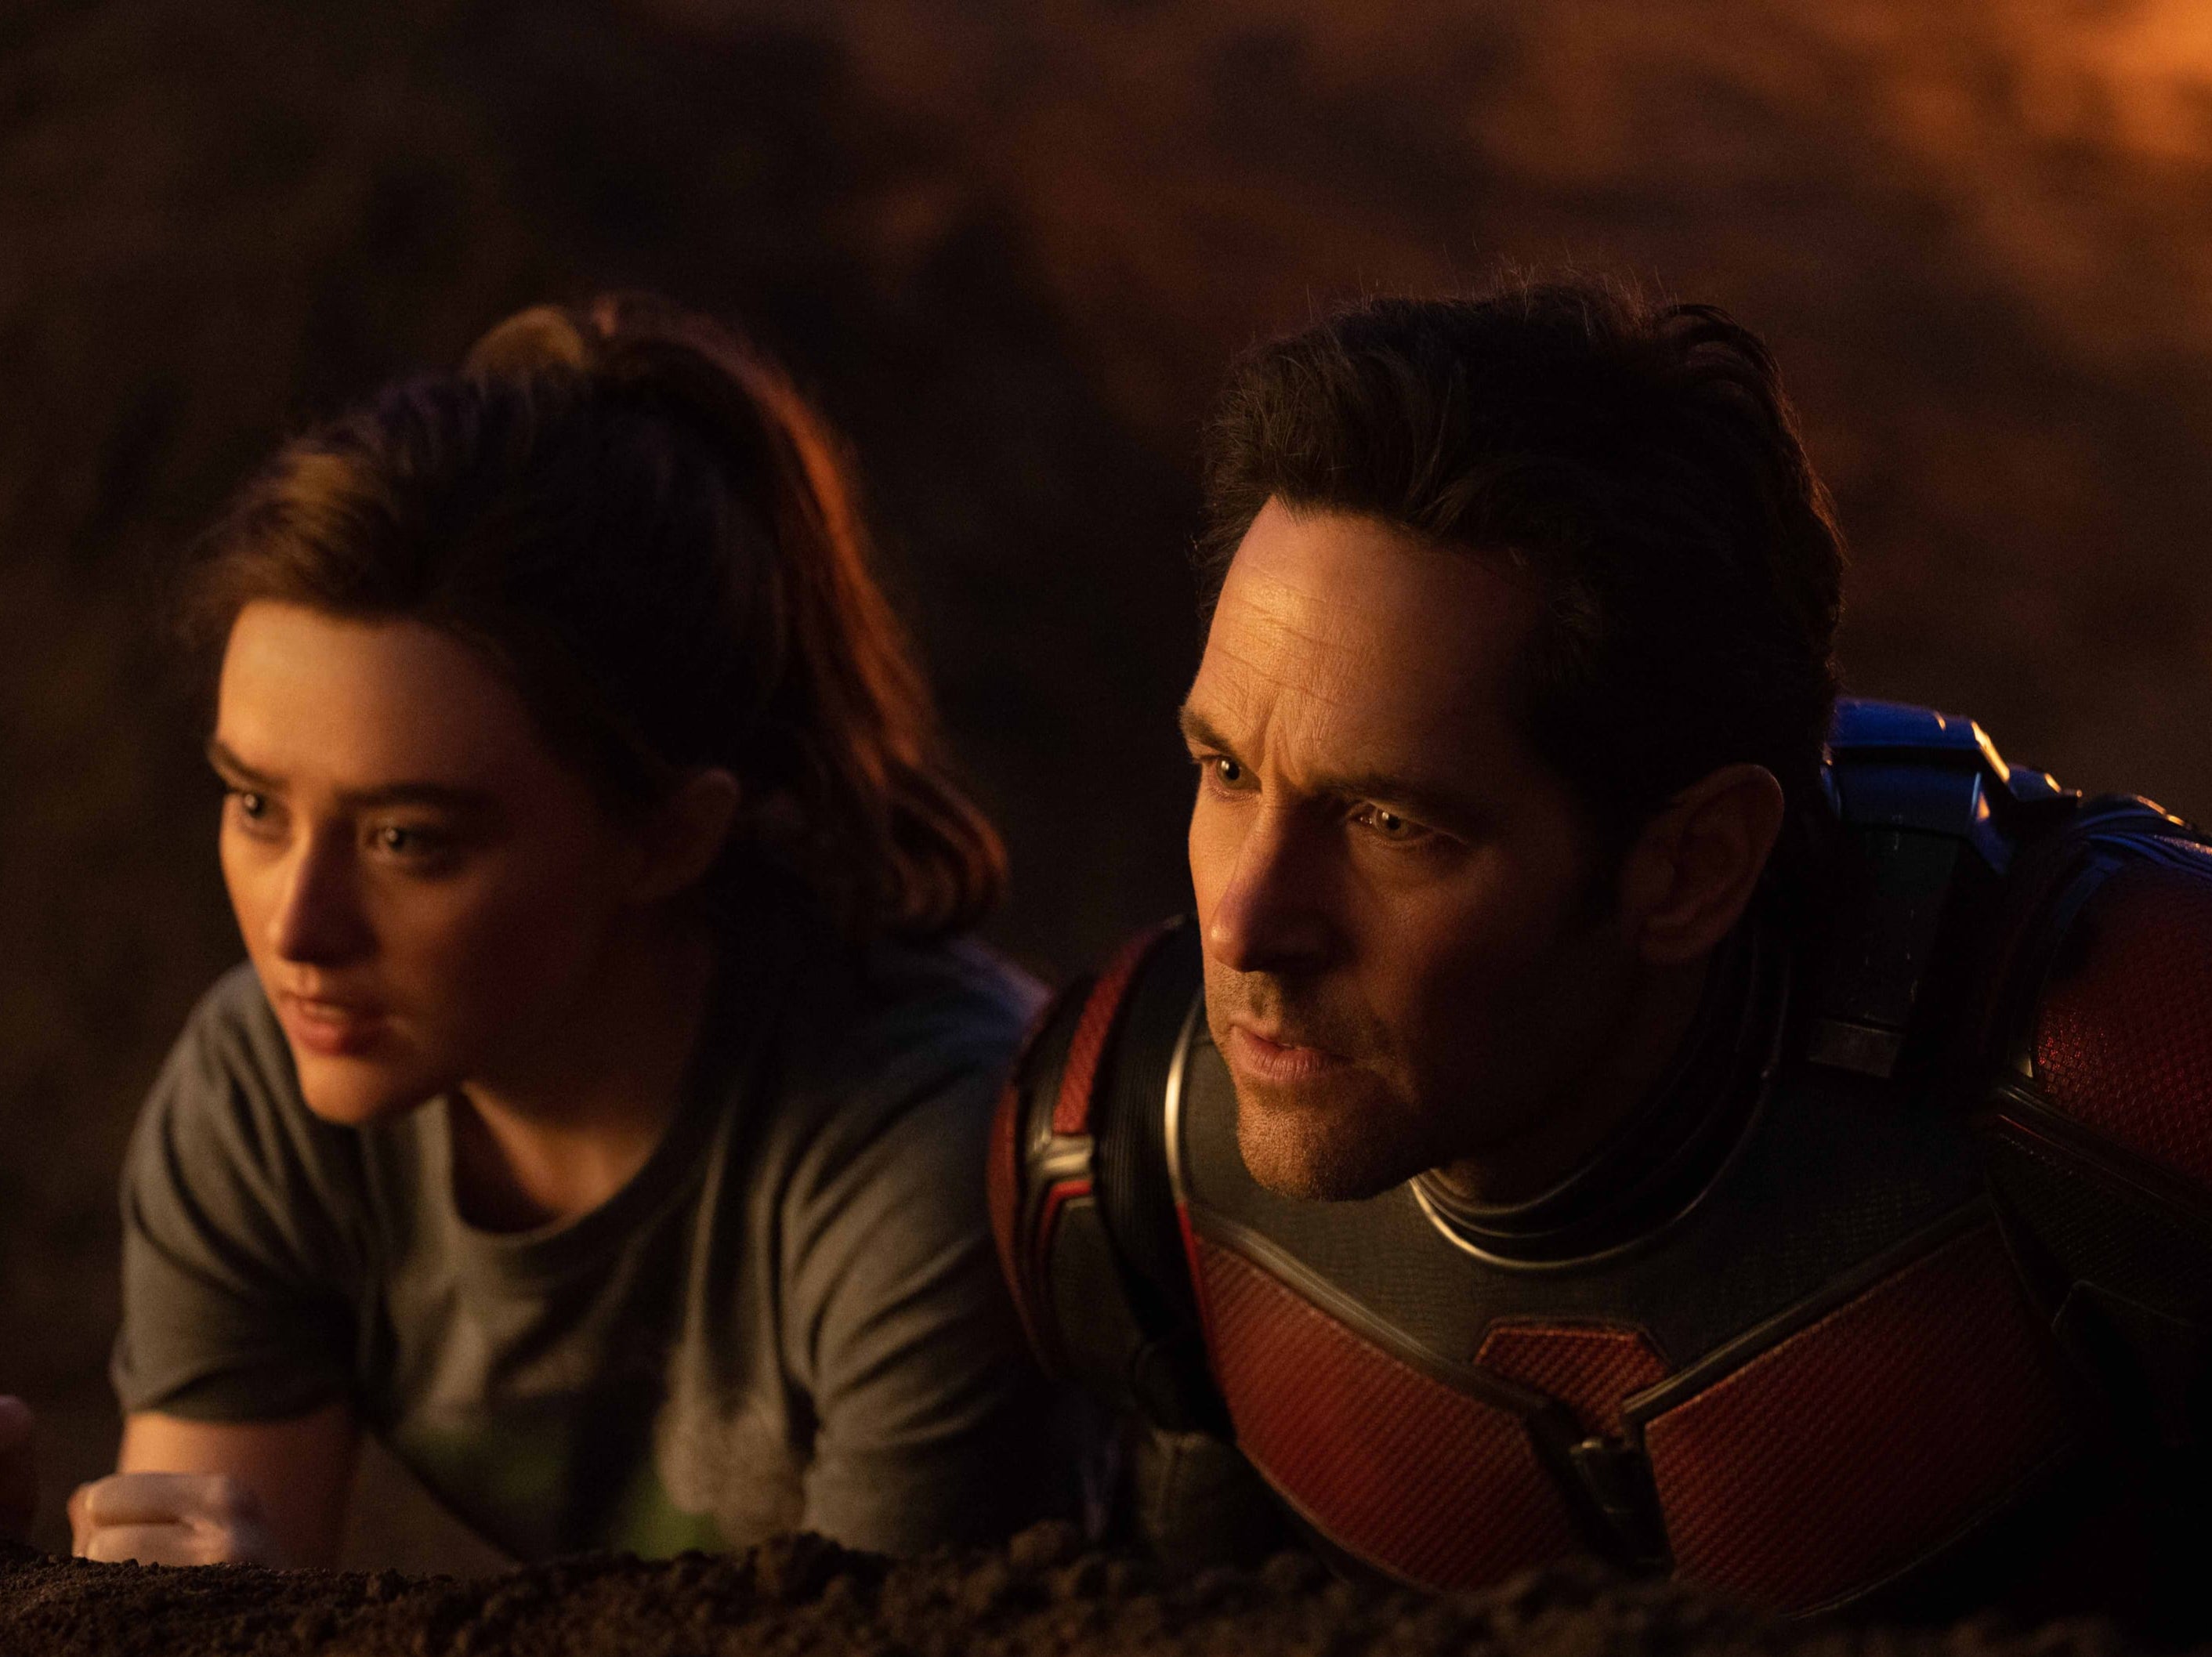 Ant-Man and the Wasp: Quantumania's Disney Plus release date